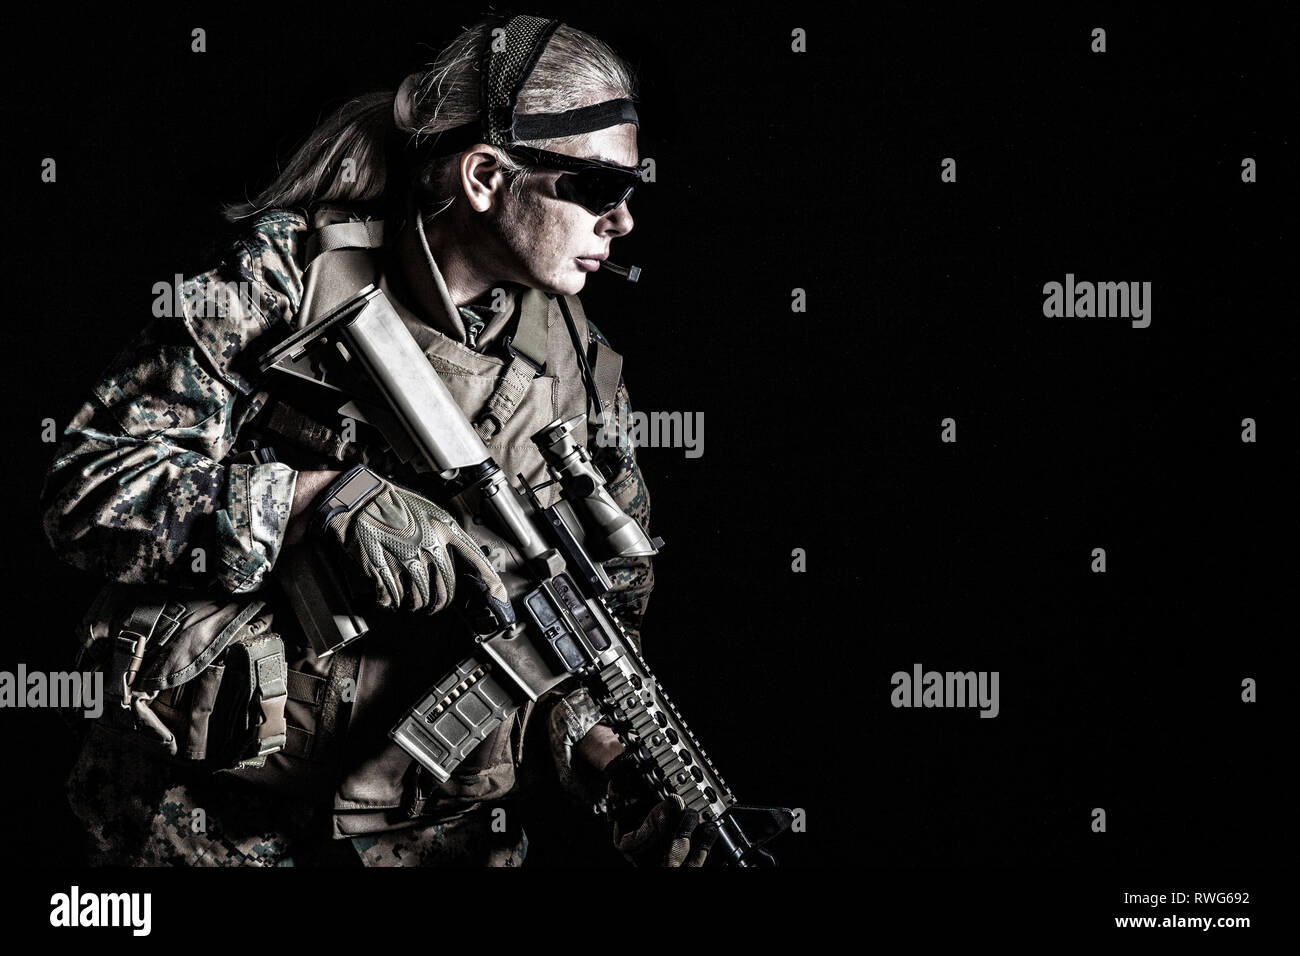 Female U.S. Marine in uniform, equipped with rifle. Stock Photo